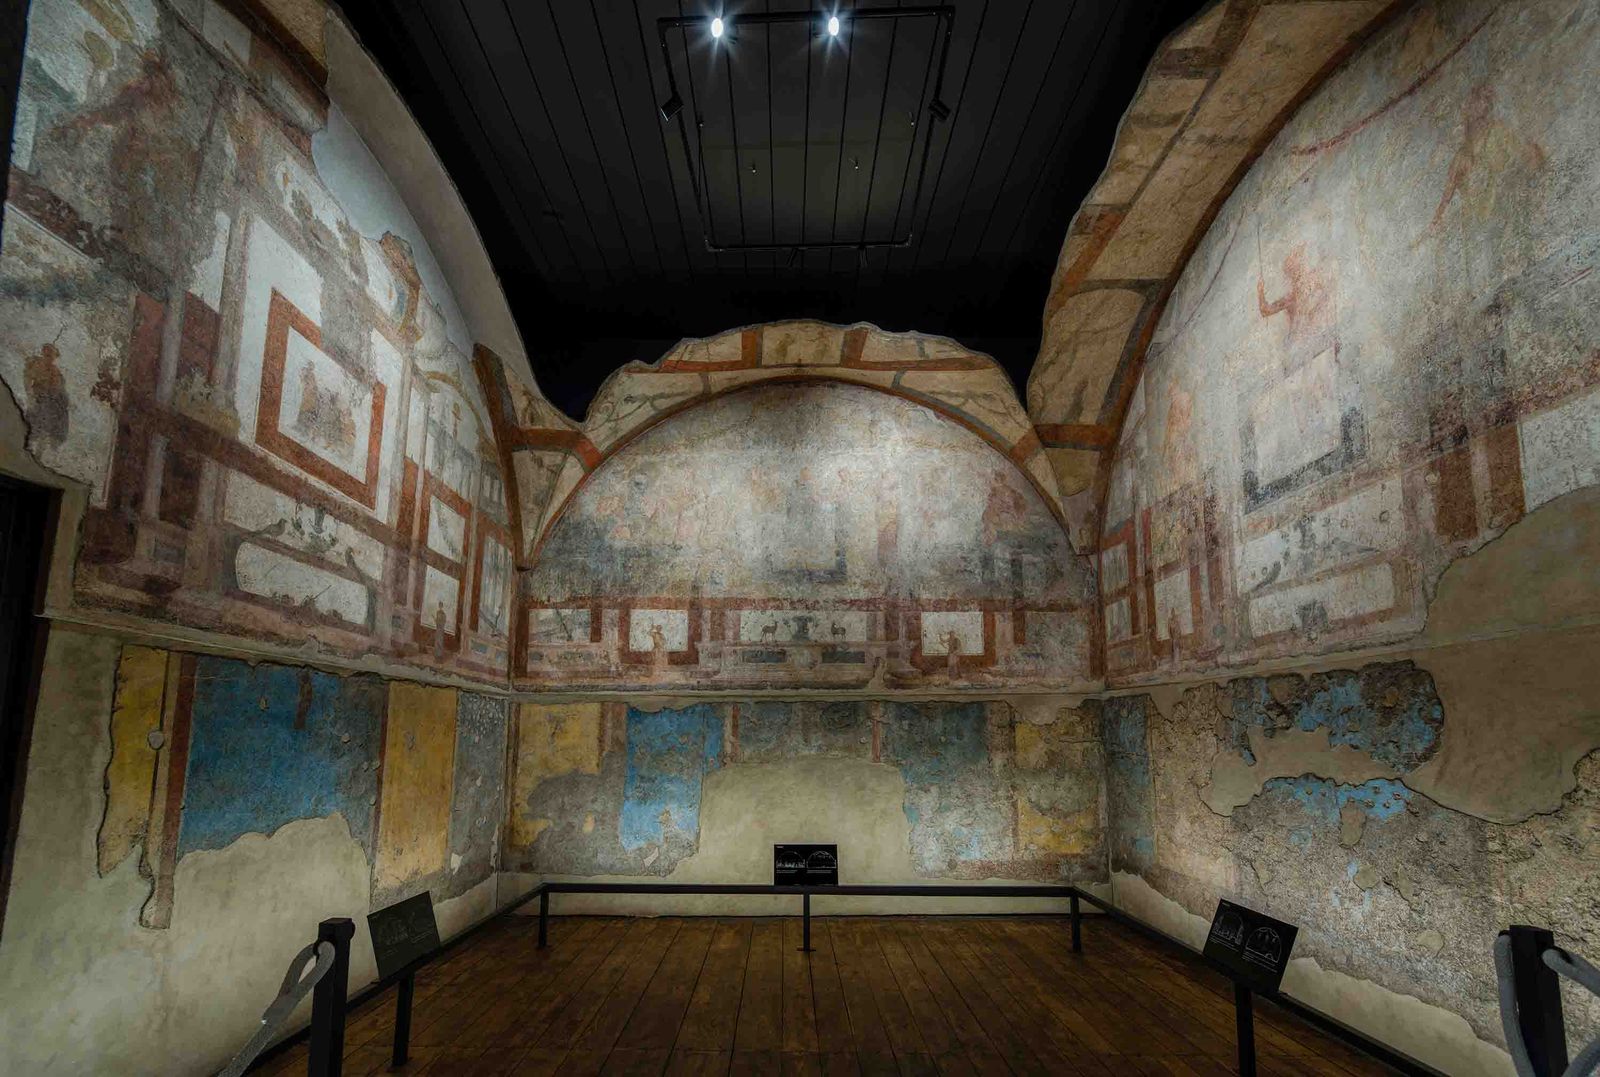 An Ancient Home Found Beneath the Baths of Caracalla Is Now on Display | Smart News